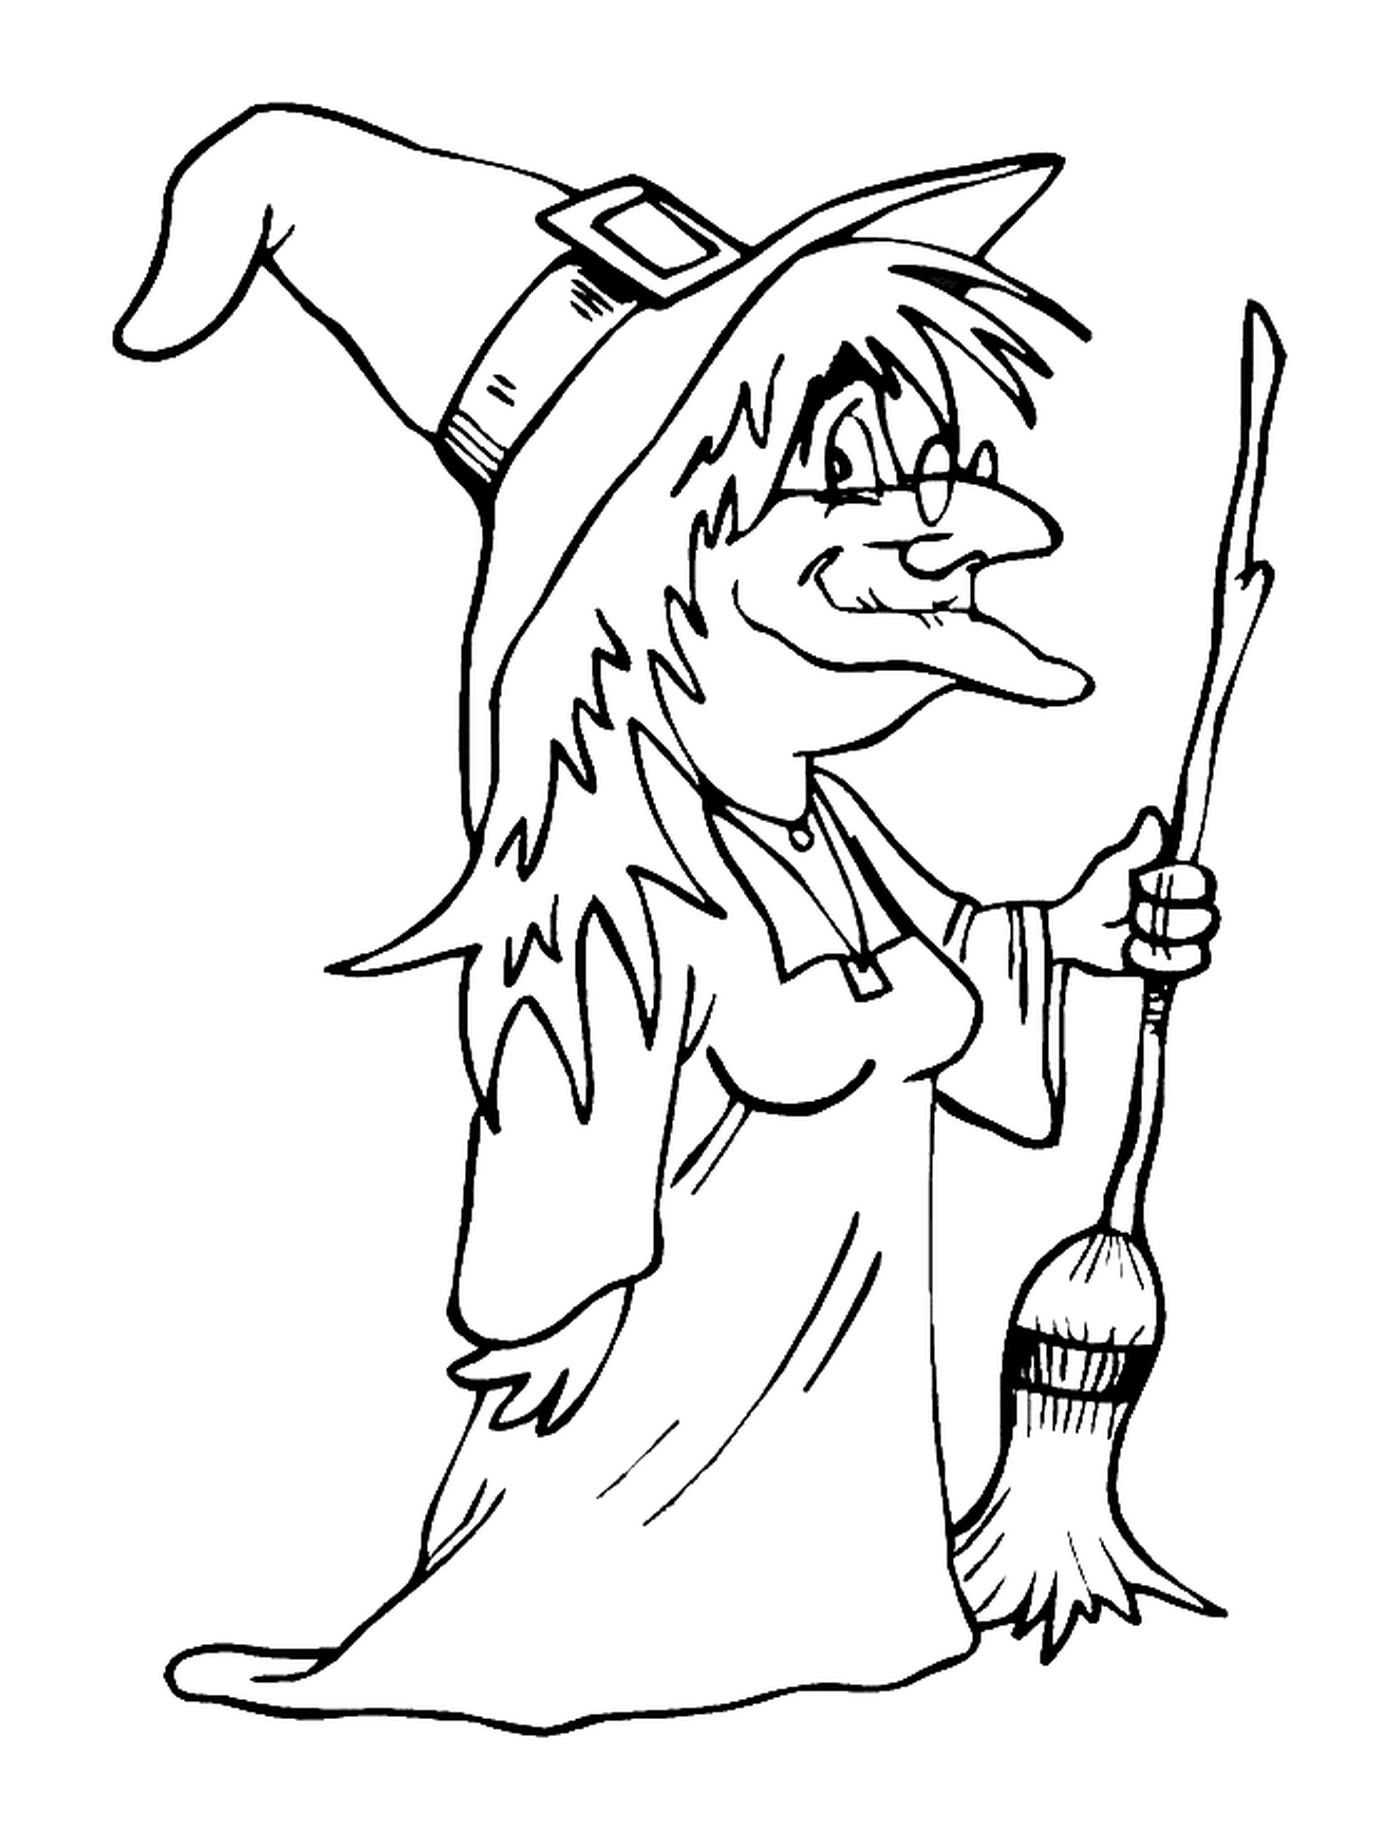  Old witch holding a broom 